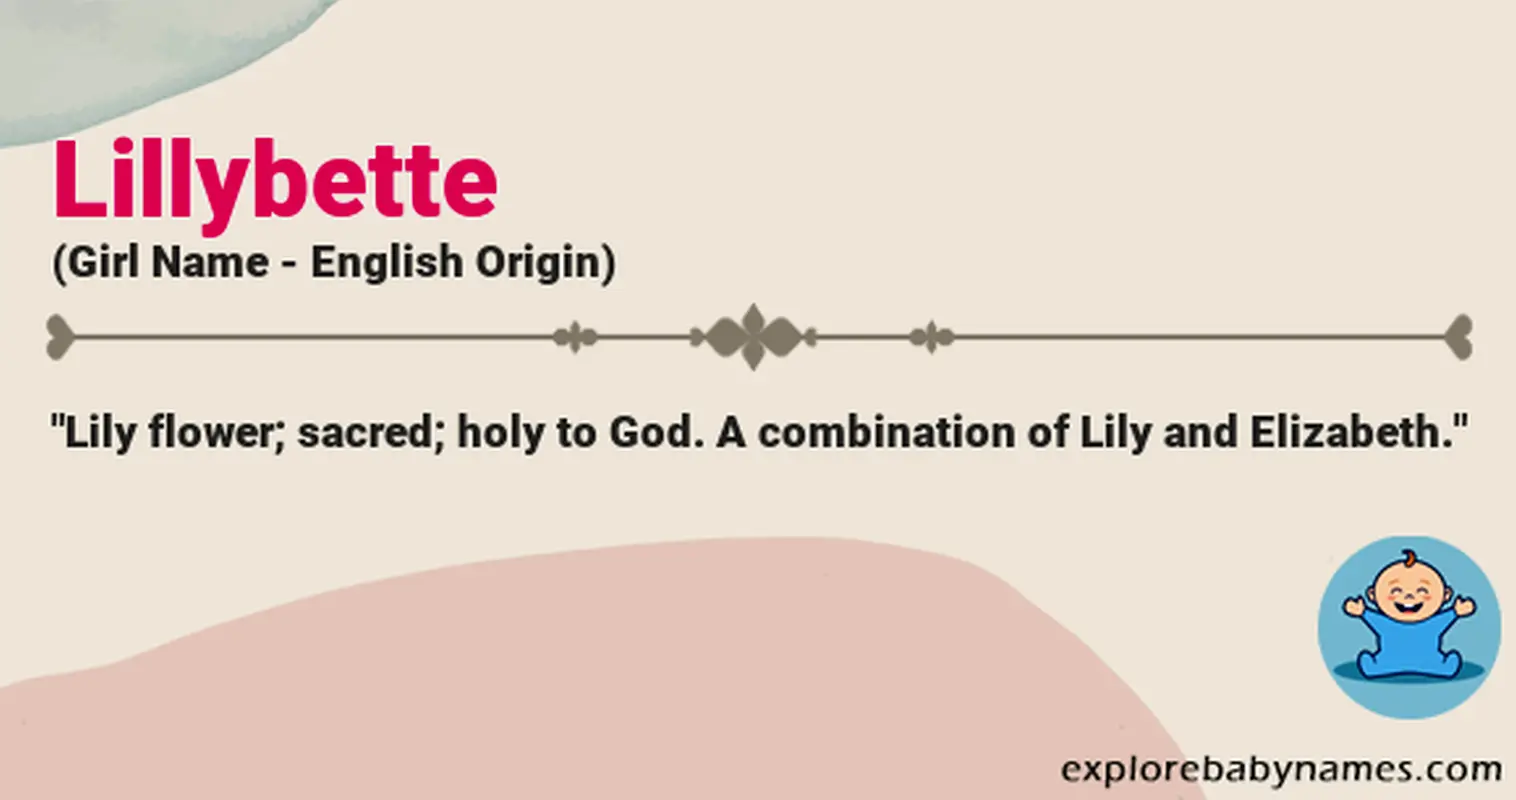 Meaning of Lillybette